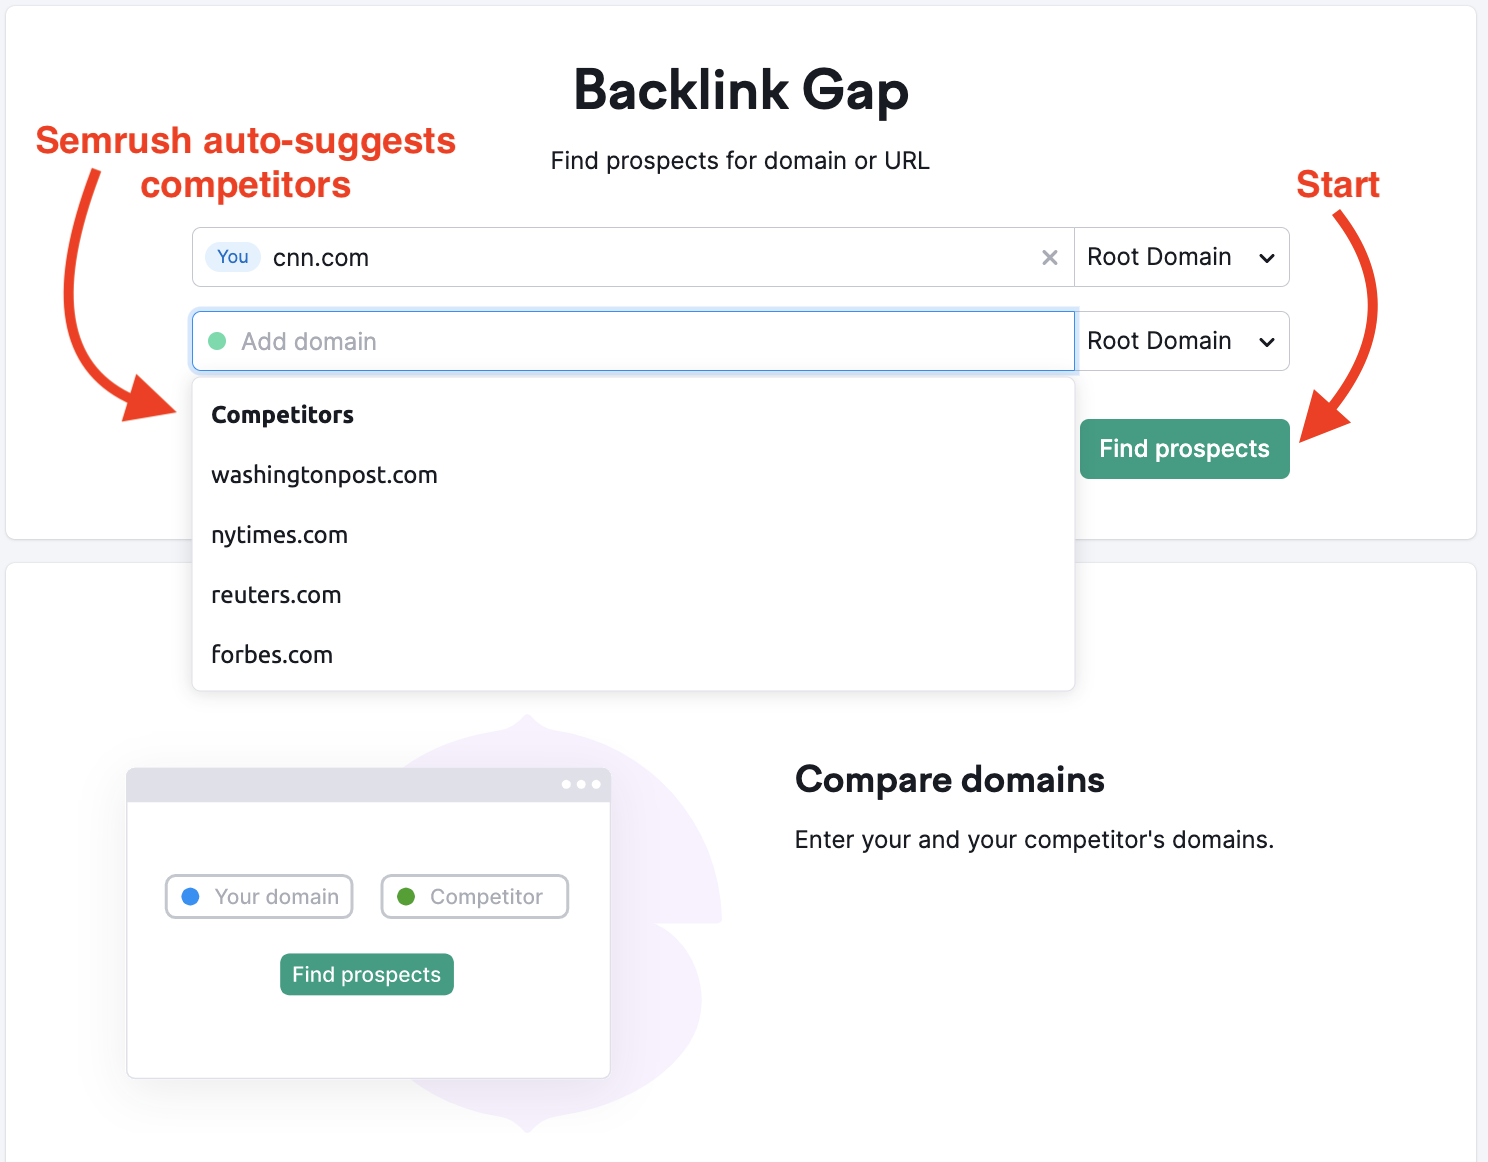 Backlink Gap landing page with a red arrow pointing to the drop-down with potential competitors and another arrow is pointing to the green Find prospects button on the right.  